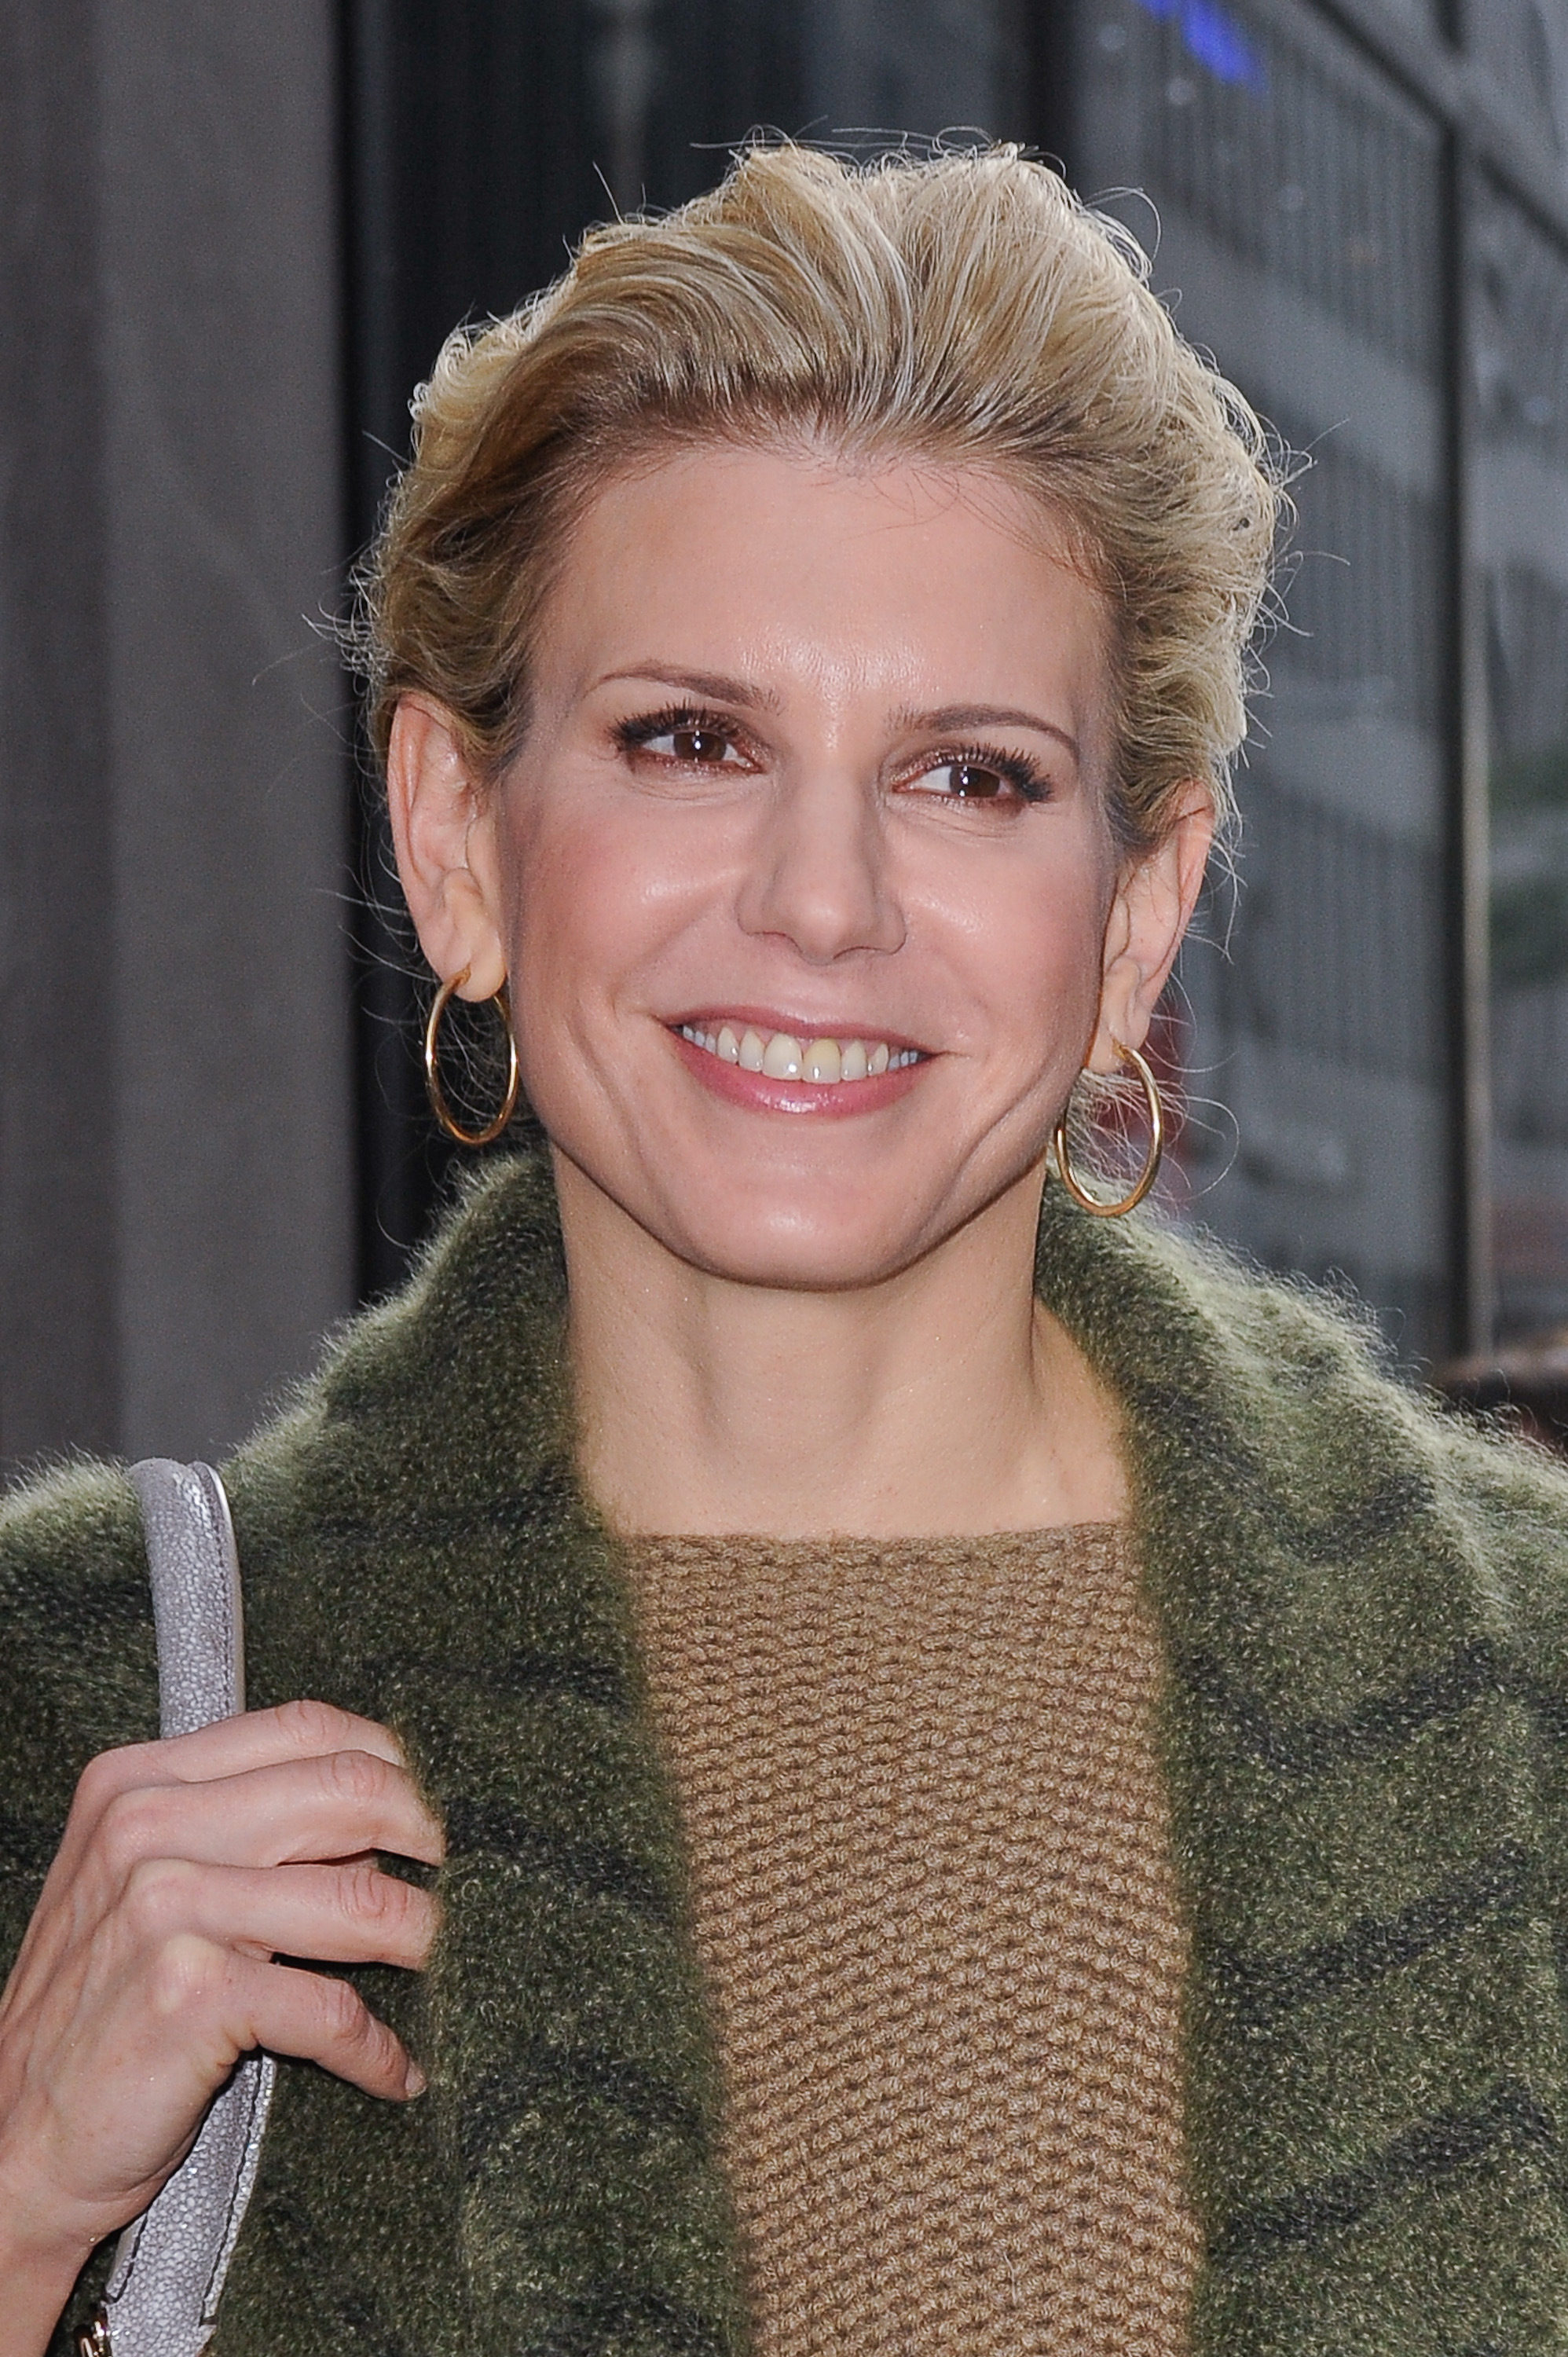 Alexis Stewart leaves the "Today Show" taping on October 24, 2011, in New York City | Source: Getty Images